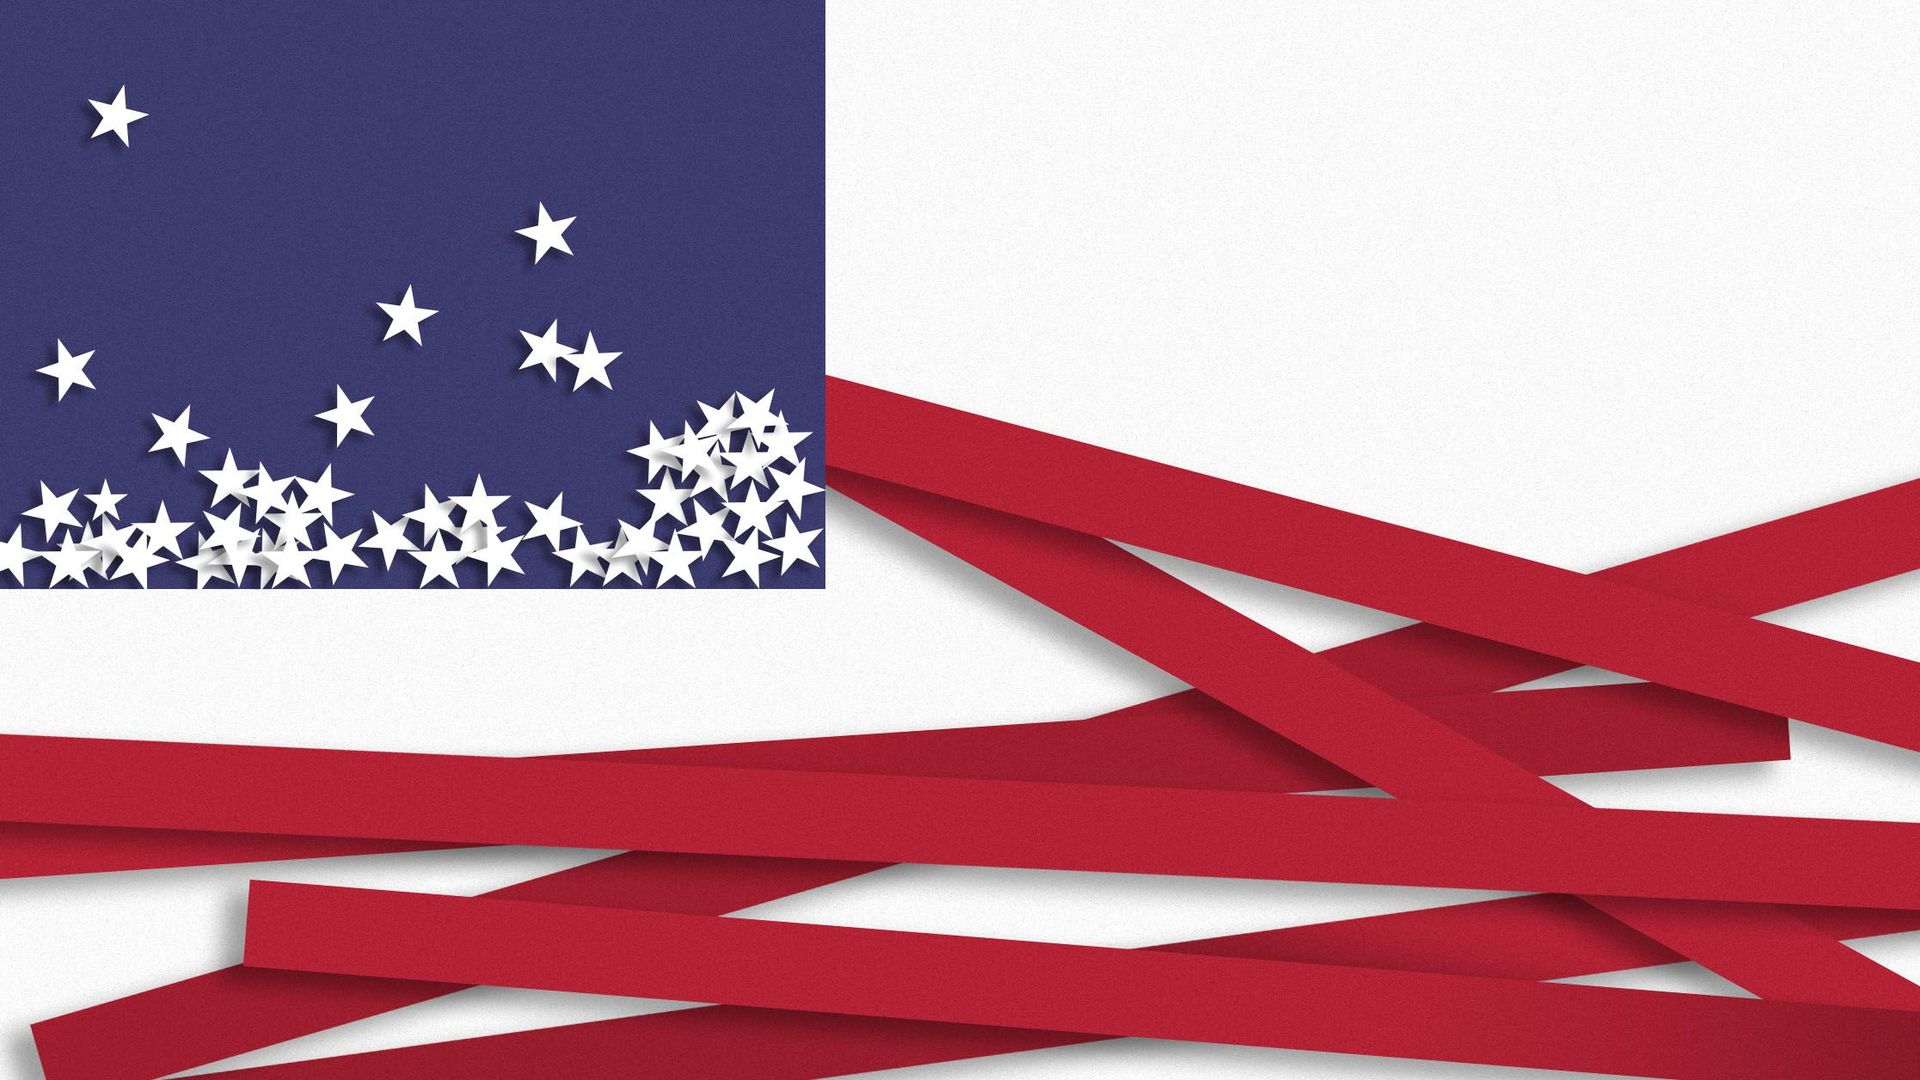 Illustration of an American flag with collapsed stars and stripes